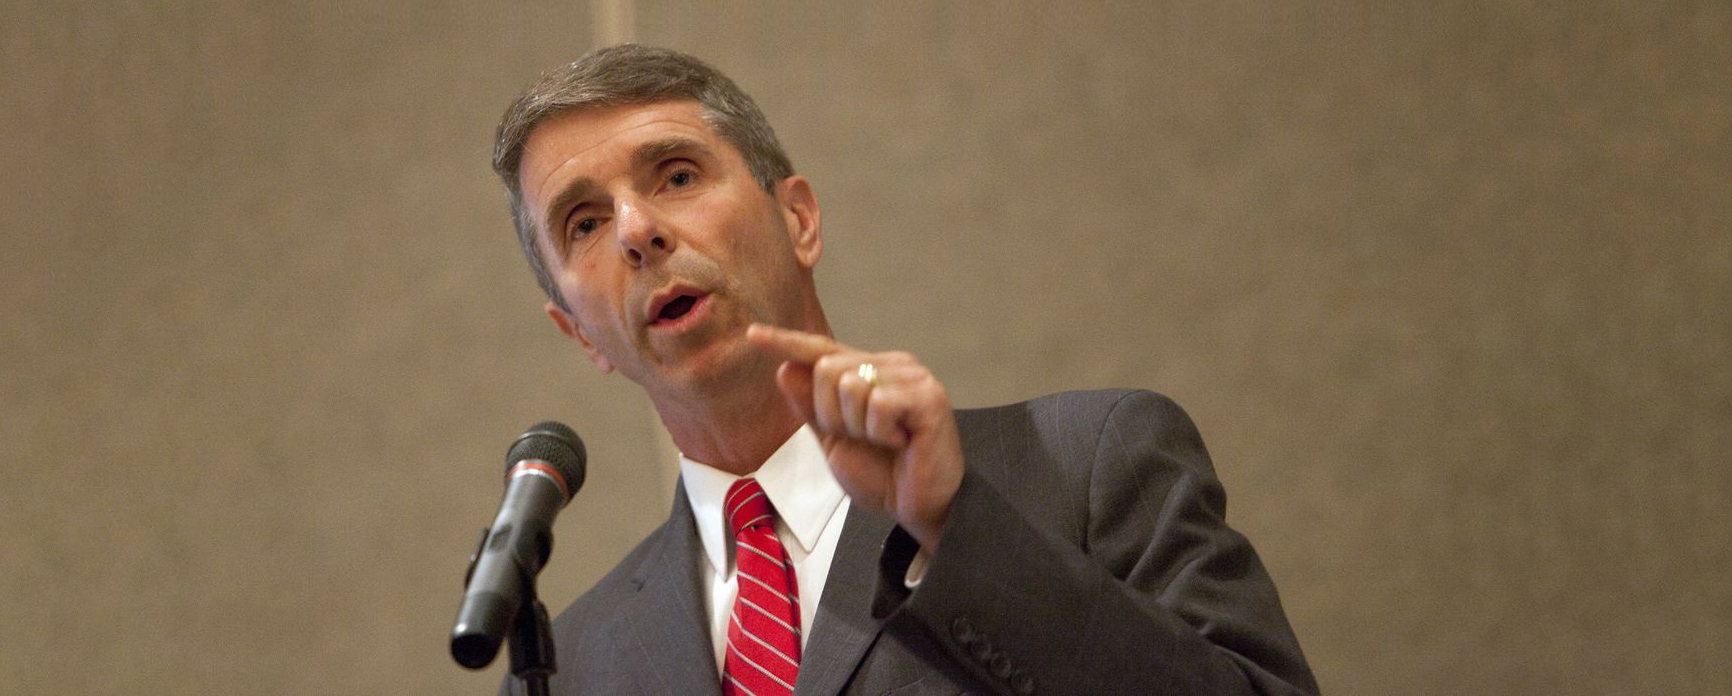 A still of Rep. Rob Wittman speaking at the Chamber of Commerce during a press conference in September 2012